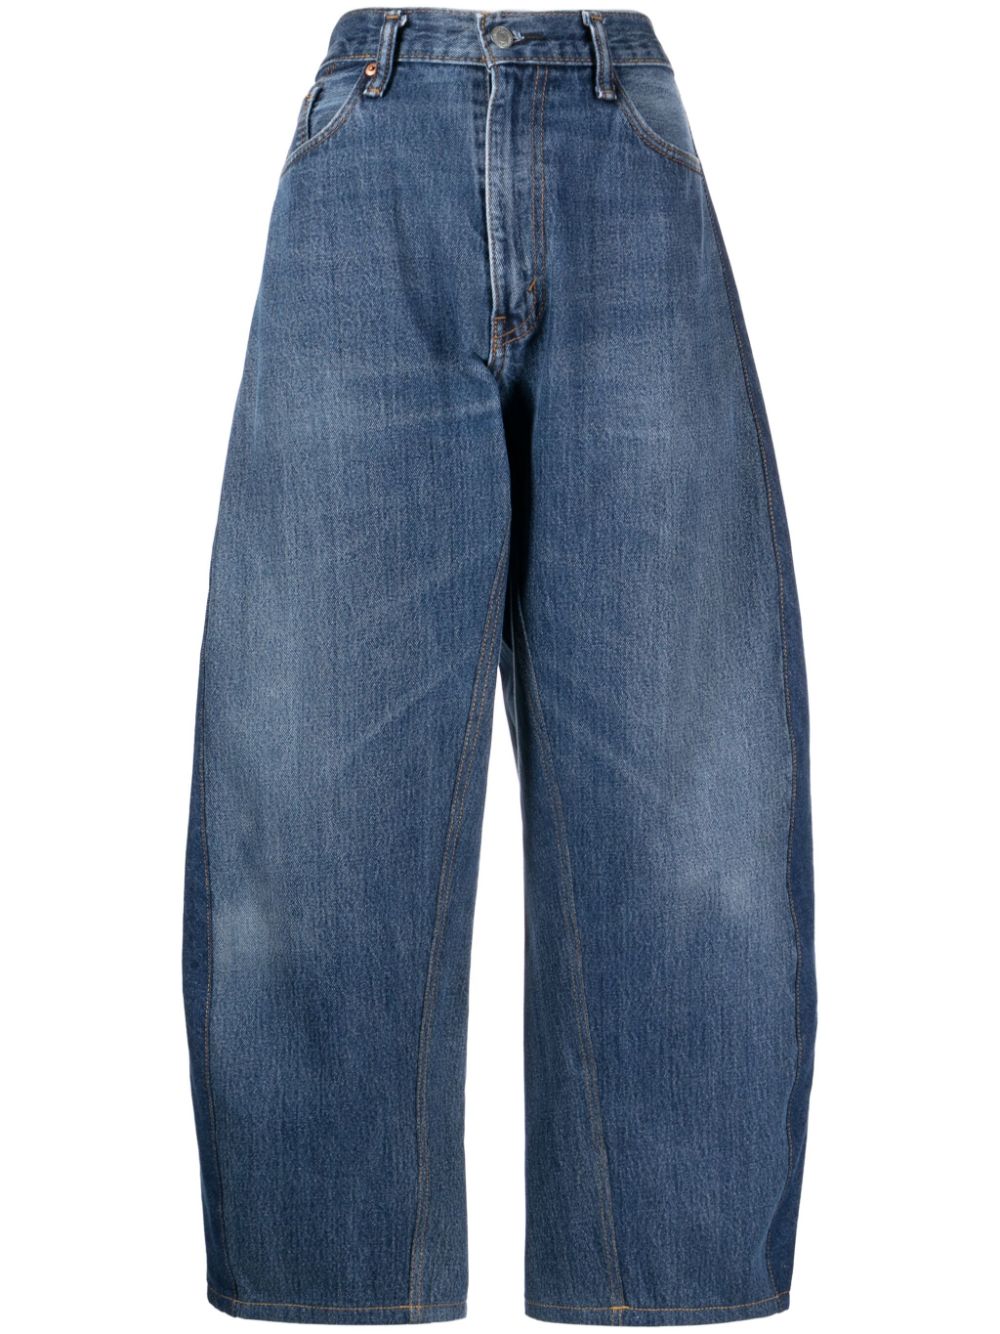 Puppets and Puppets panelled tapered cropped jeans - Blue von Puppets and Puppets